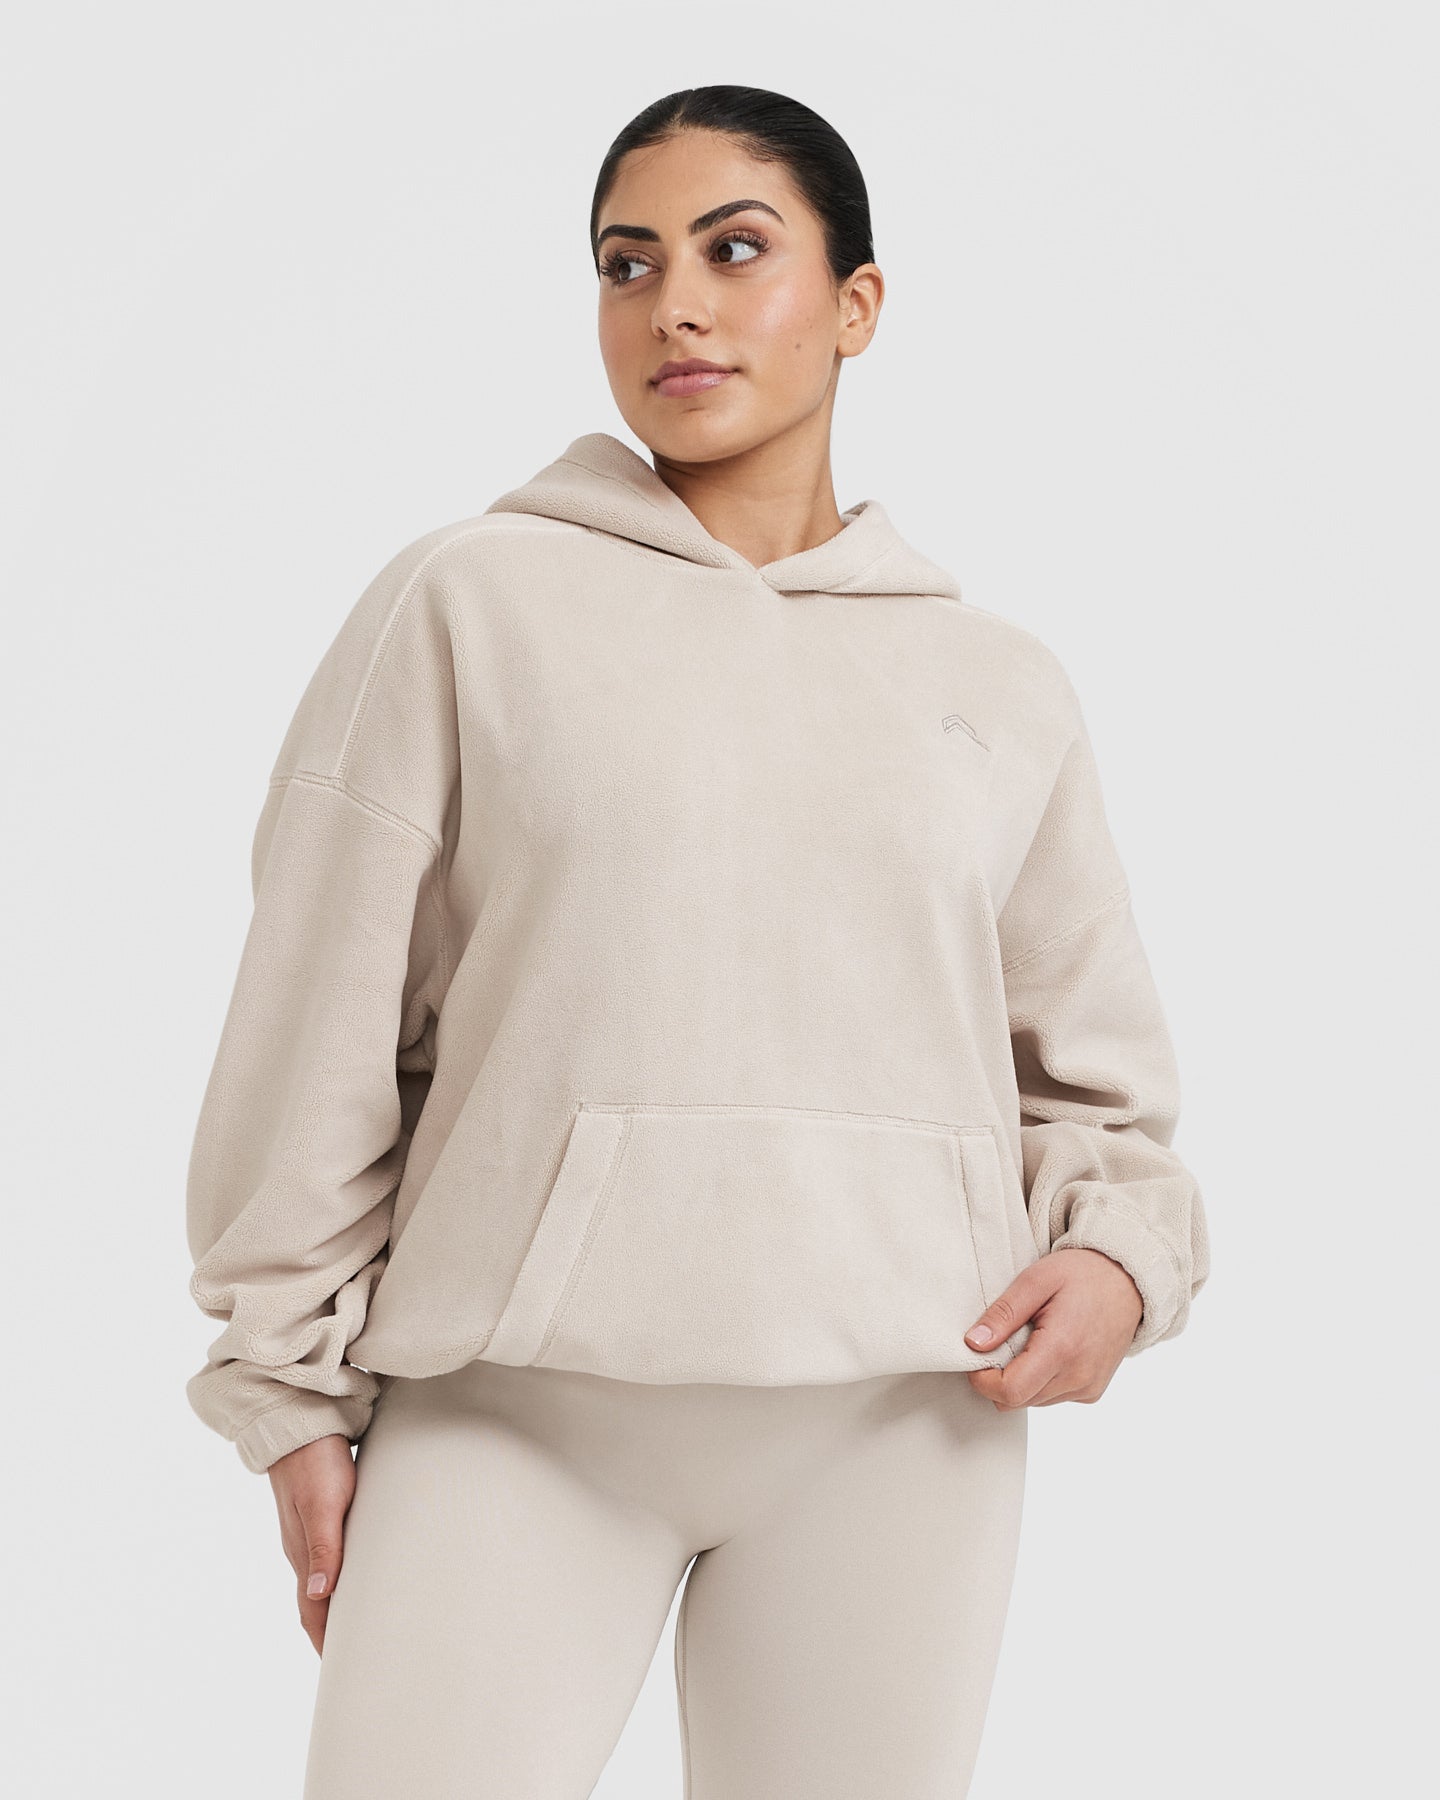 Our Fleece Oversized Hoodie in Sand with a lined hood & flat-stitched ...